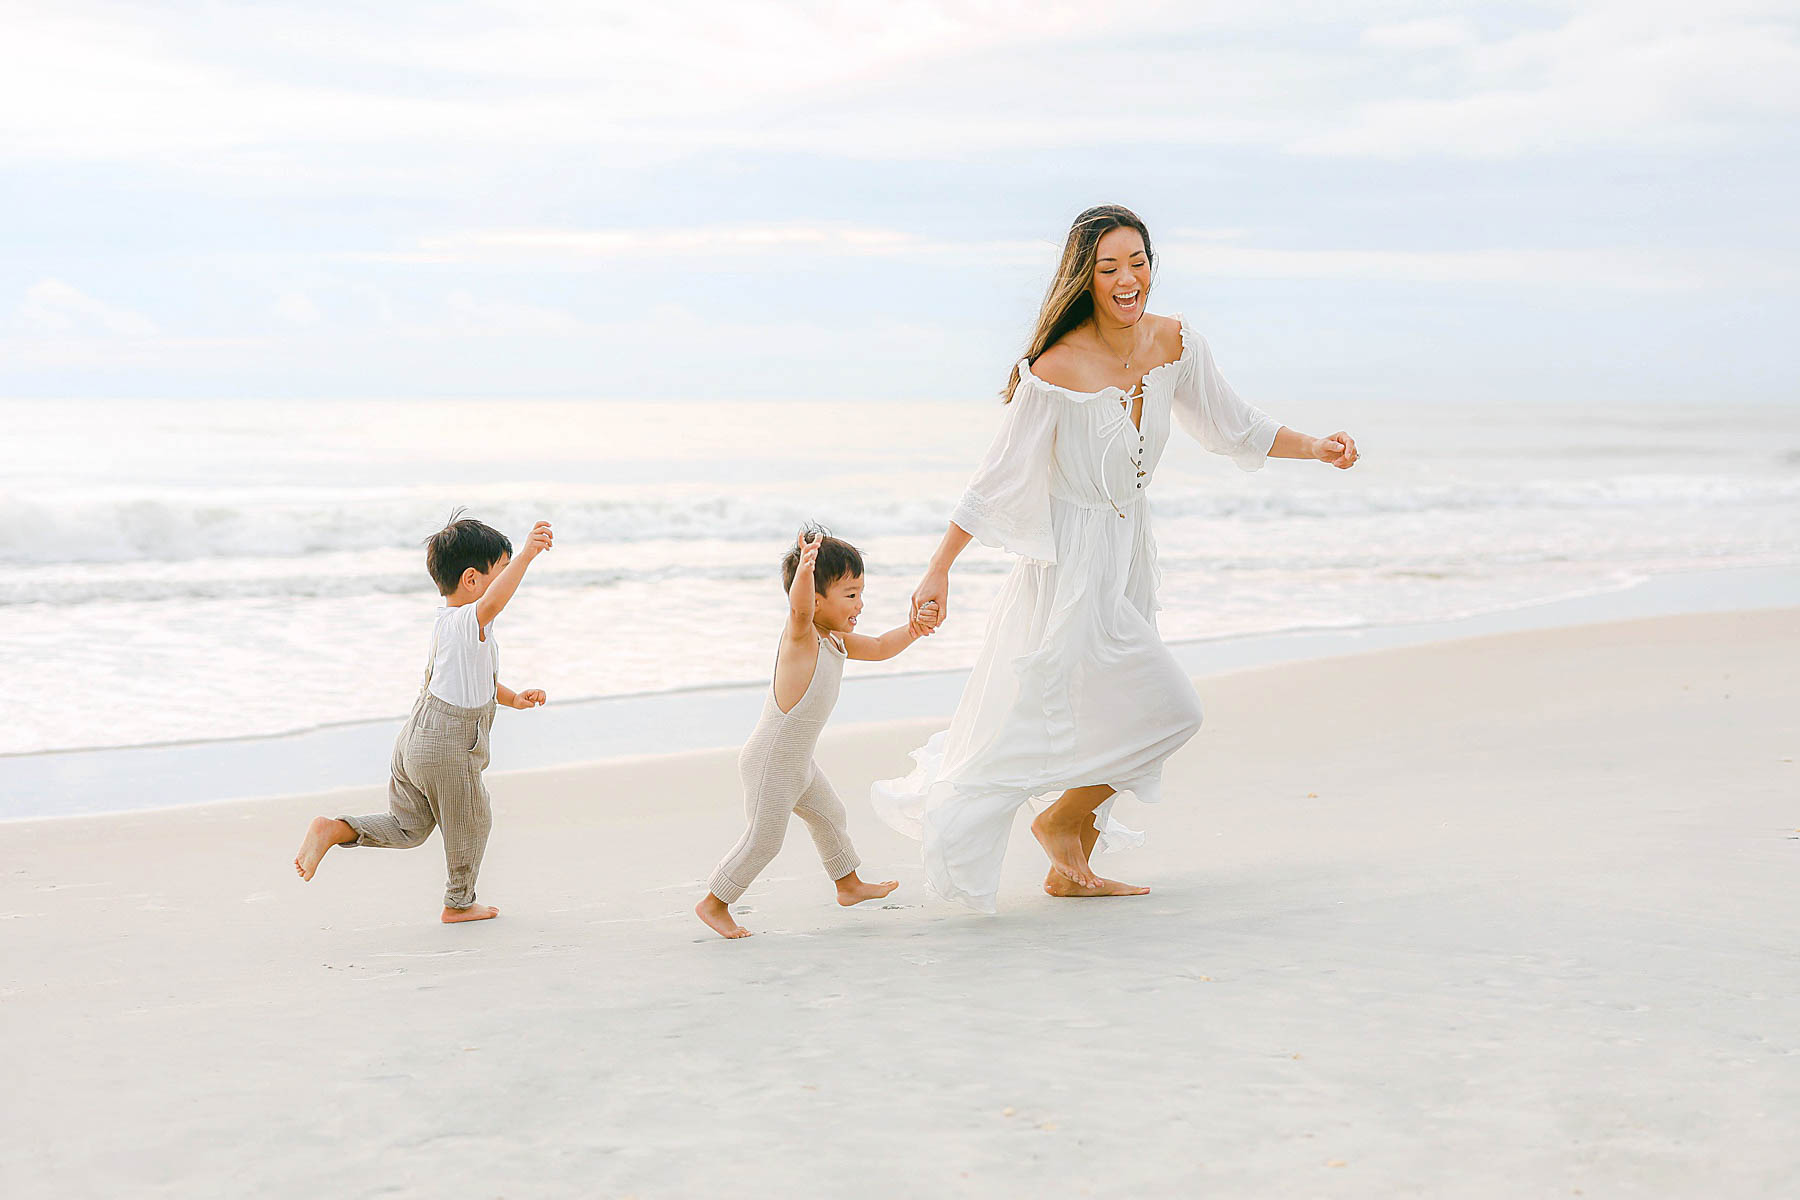 mom running with her kids on the beach in white dress